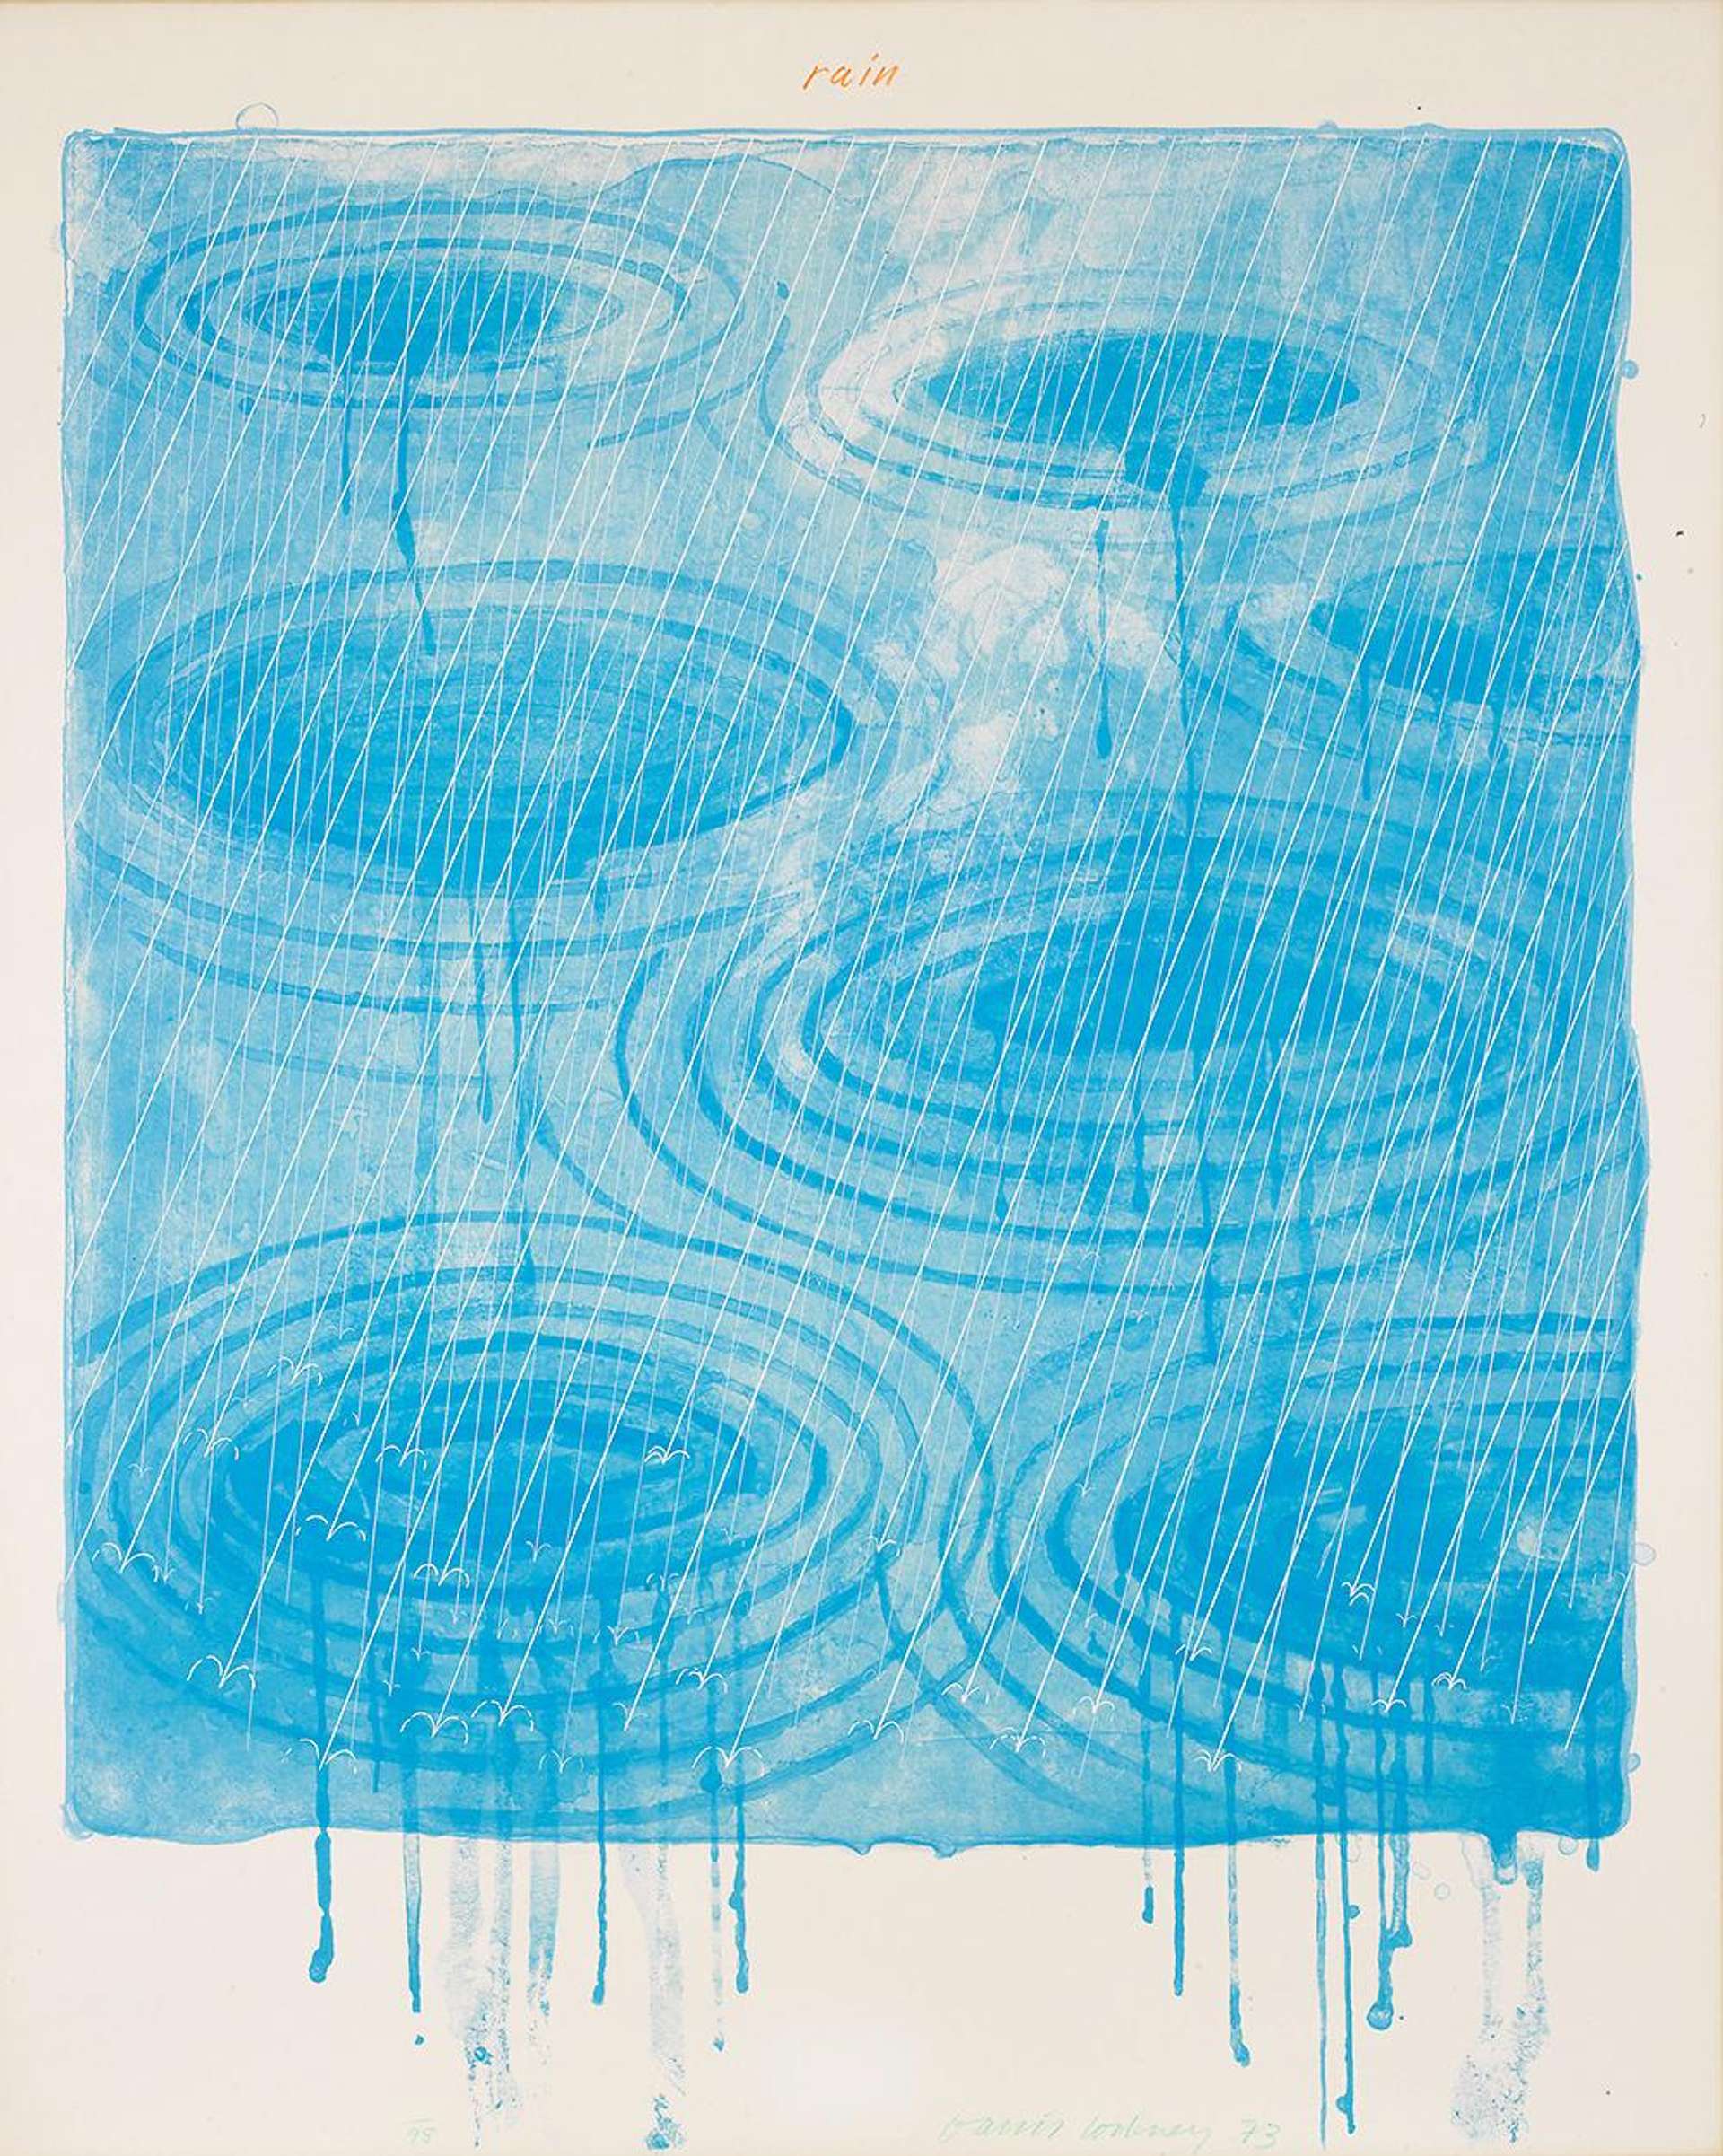 A lithograph by David Hockney showing a series of puddles made up of concentric circles or ripples being filled by slants of rain.